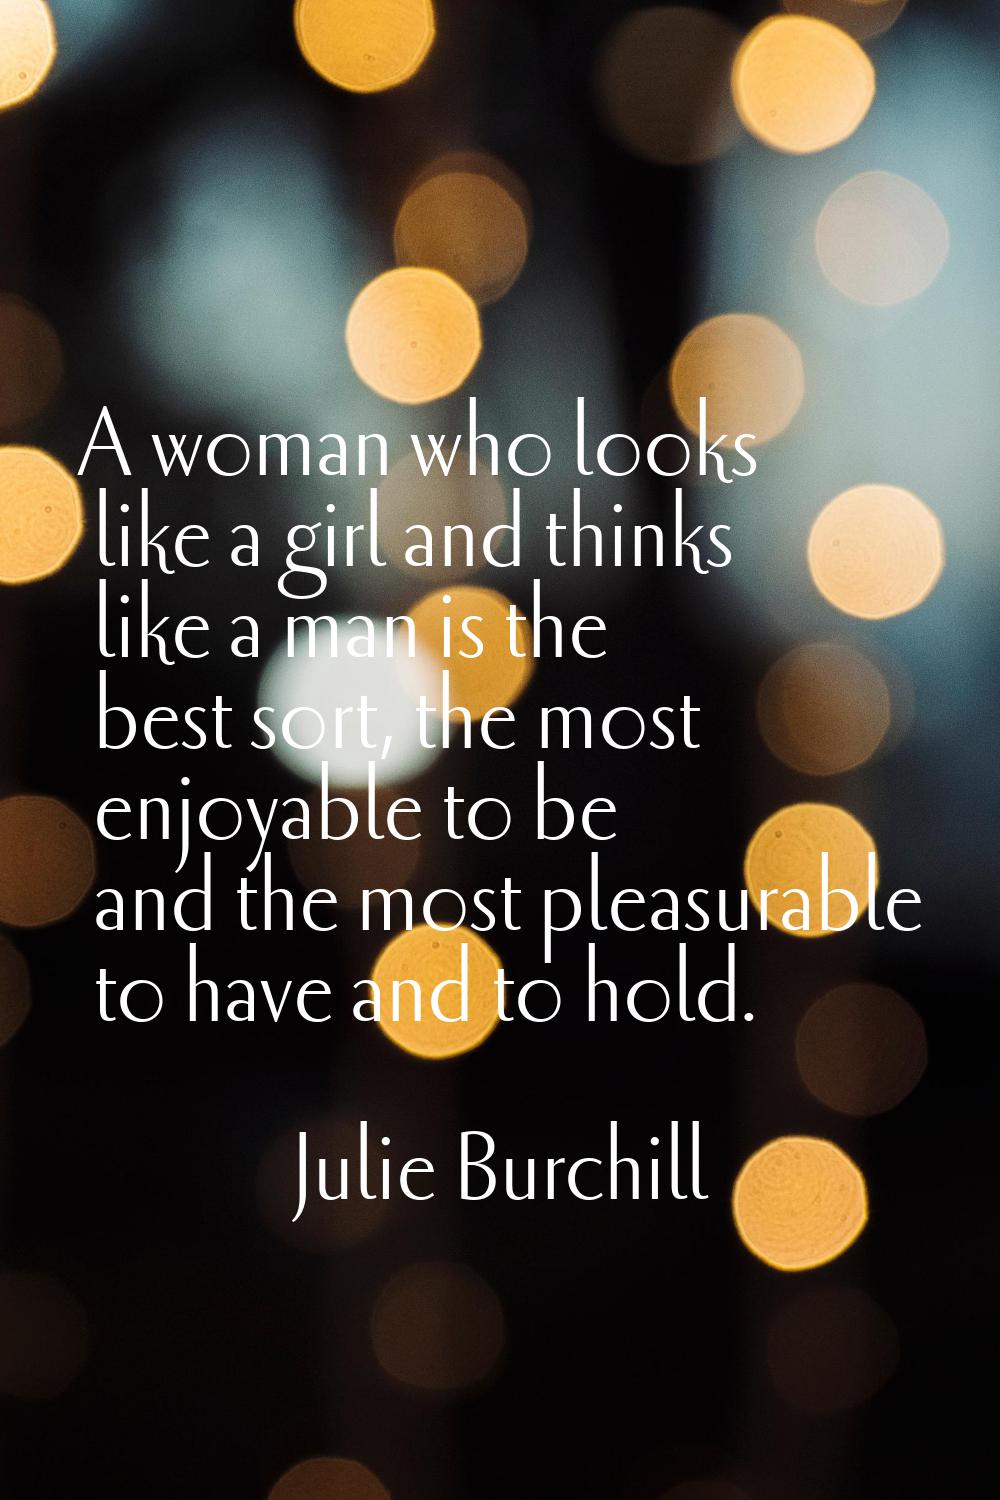 A woman who looks like a girl and thinks like a man is the best sort, the most enjoyable to be and 